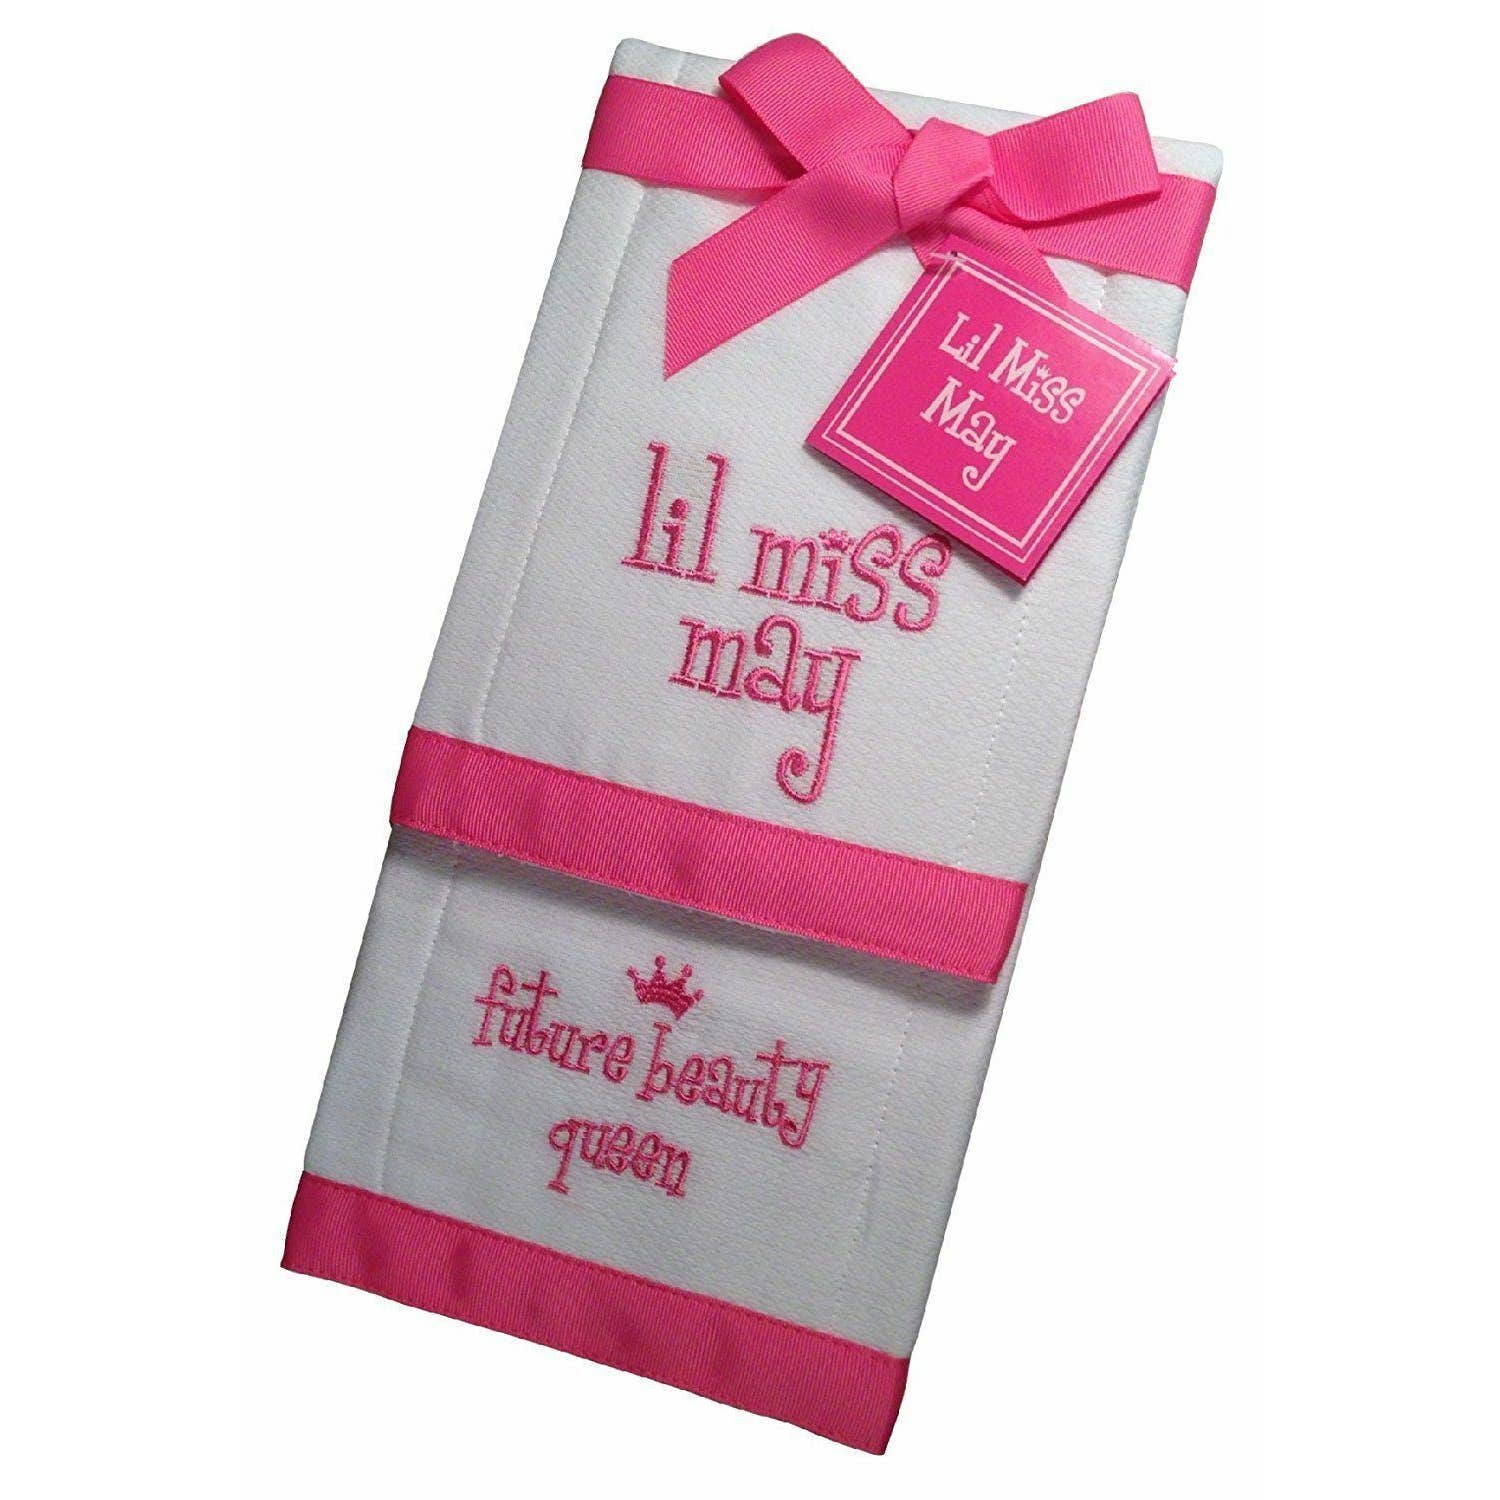 LIL Miss May Future Beauty Queen Baby Burp Bib Cloth Cotton Towel Set of 2